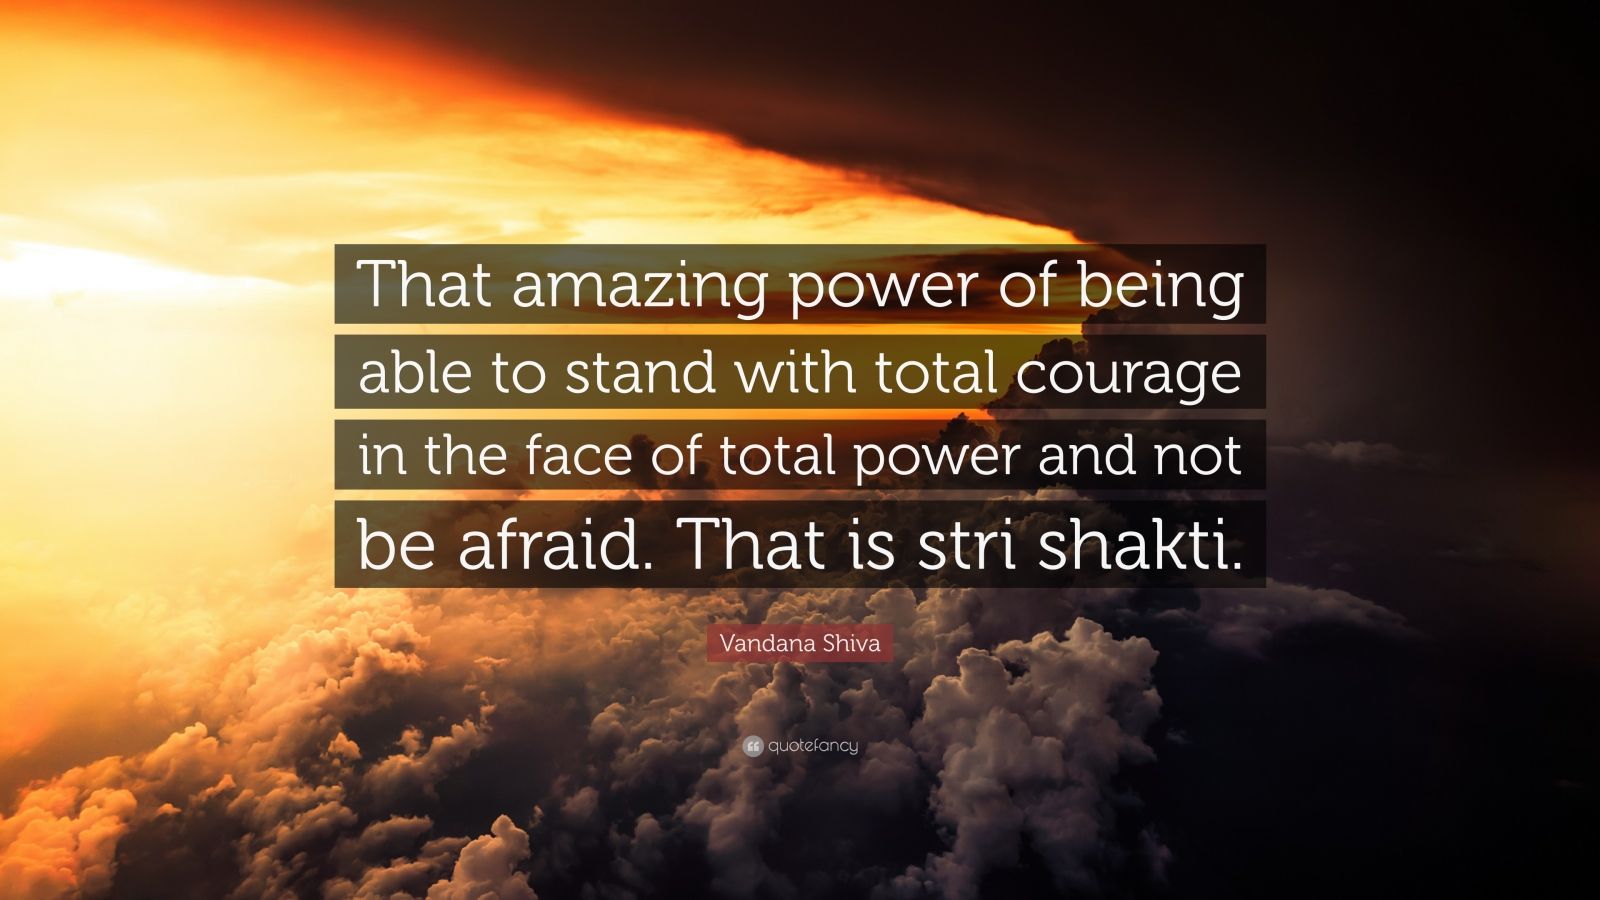 Vandana Shiva Quote: “That amazing power of being able to stand ...